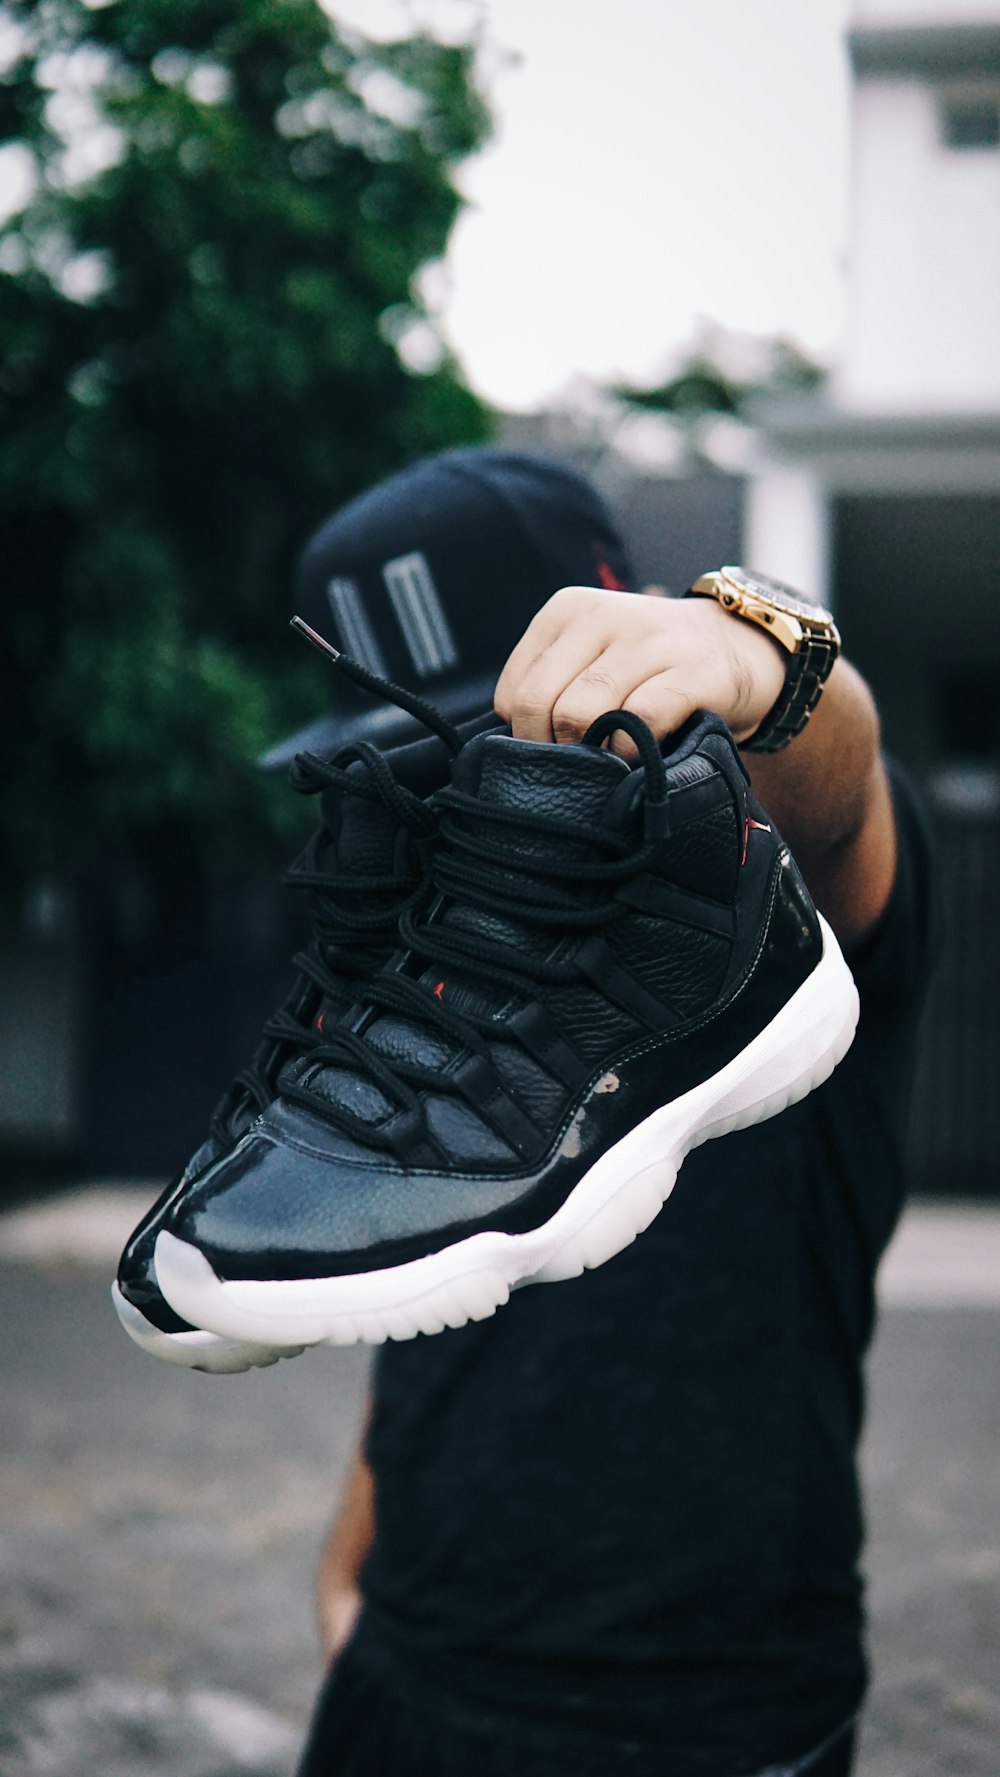 person holding pair of black-and-white Air Jordan 11's